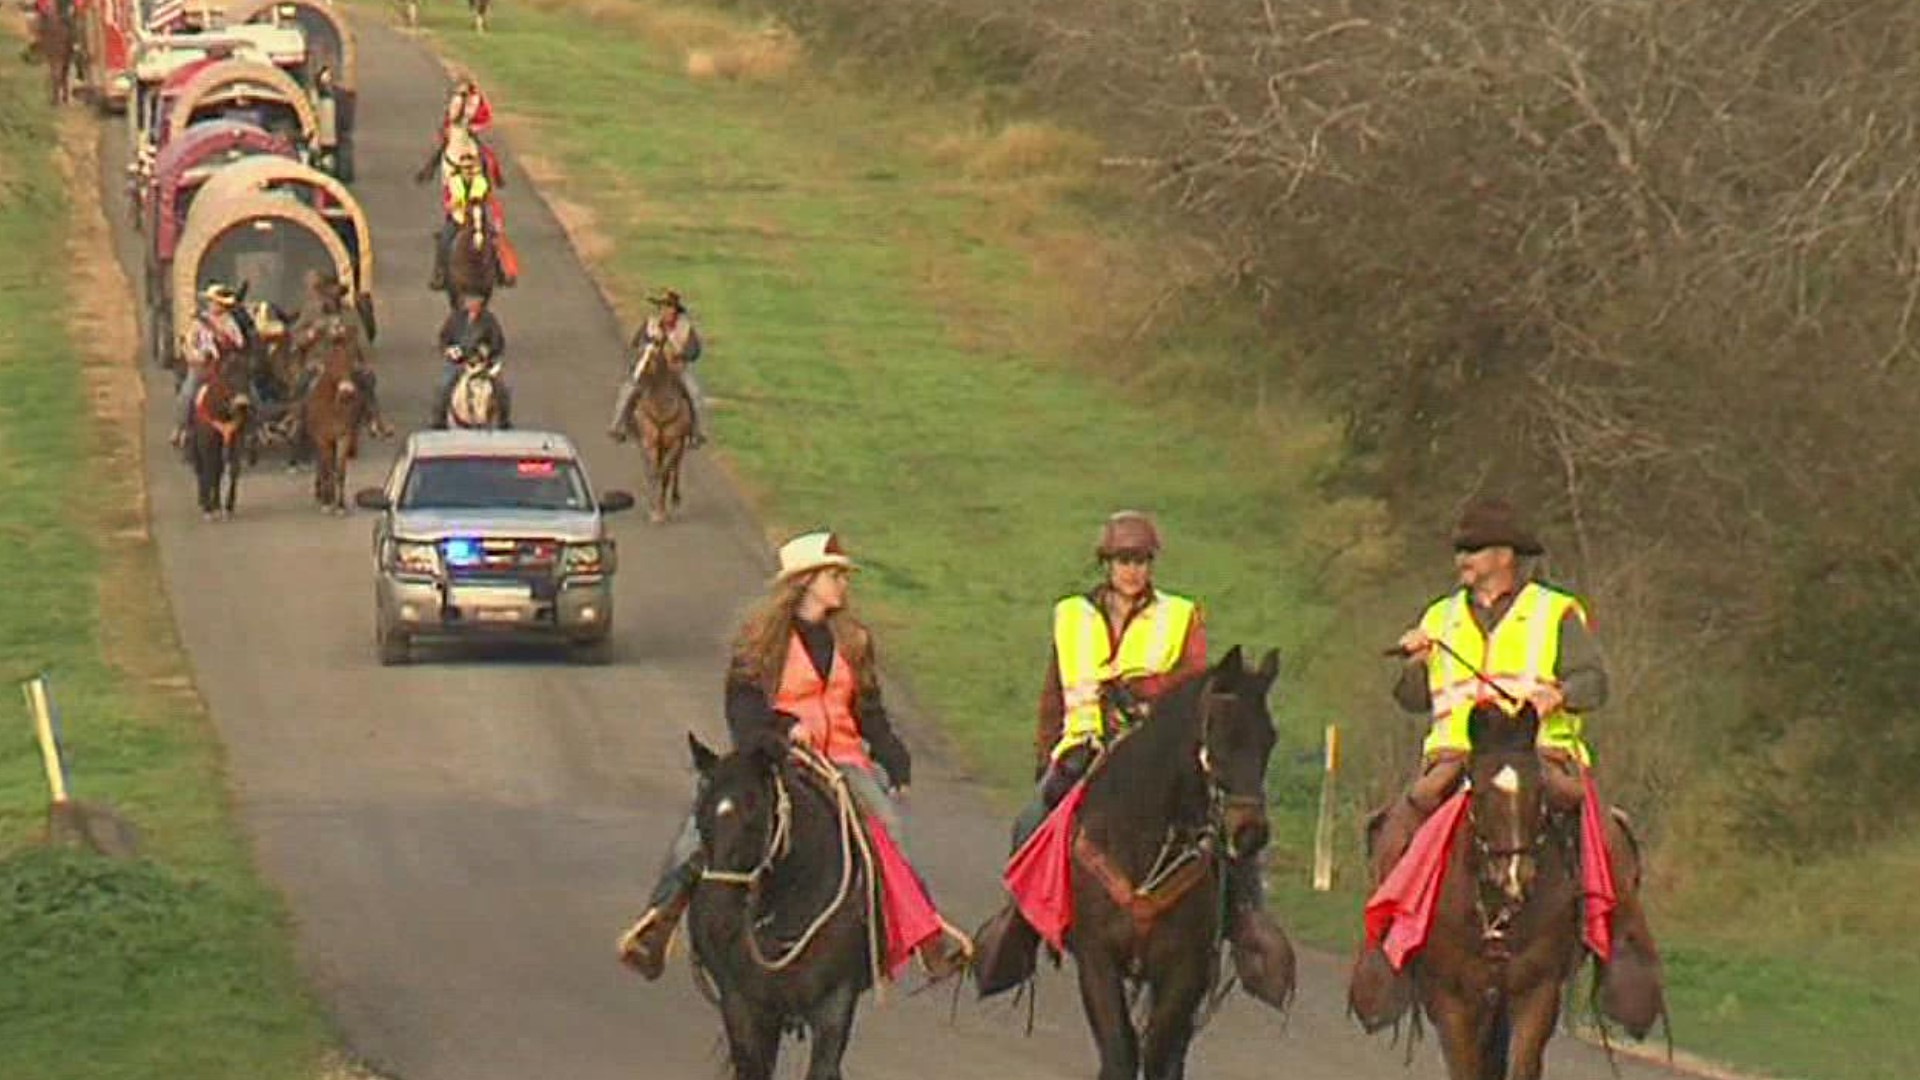 Friday morning they will mount their horses and get in their covered wagons for the 63rd annual trail ride to San Antonio for the stock show.